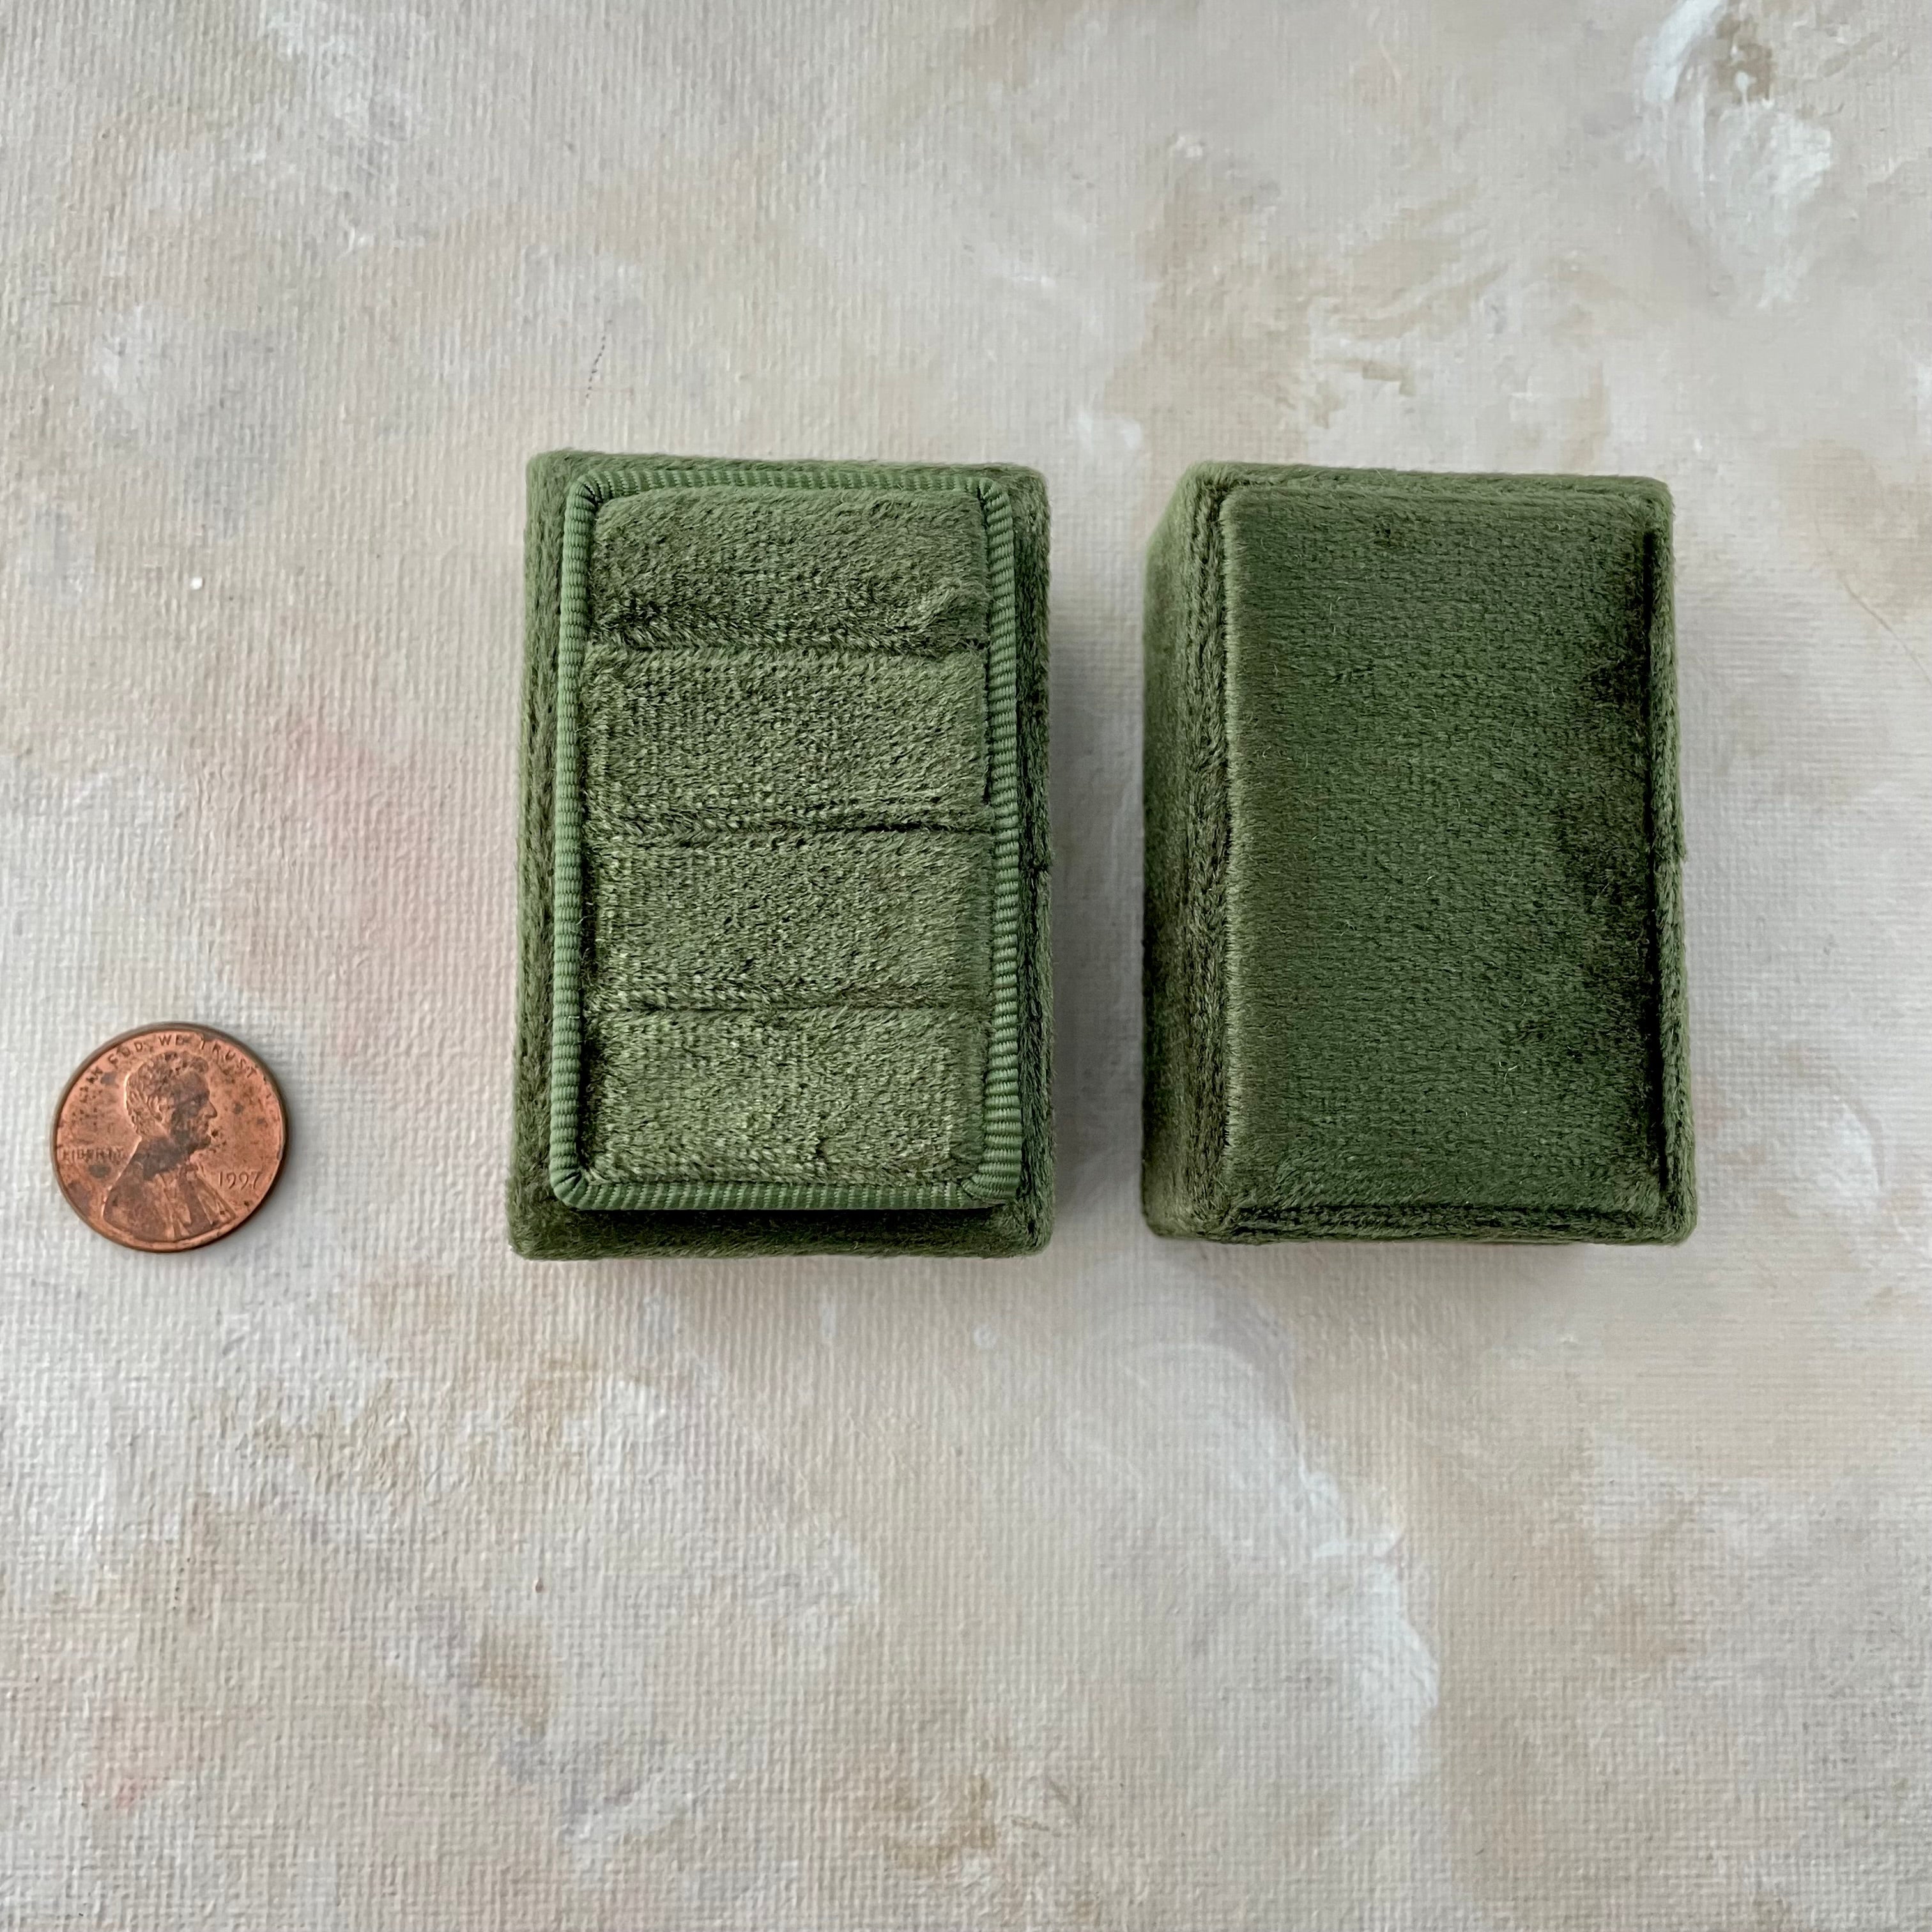 Olive Green tripe slot ring box with no rings and penny beside for size reference - Wedding Flat lay props from Champagne & GRIT